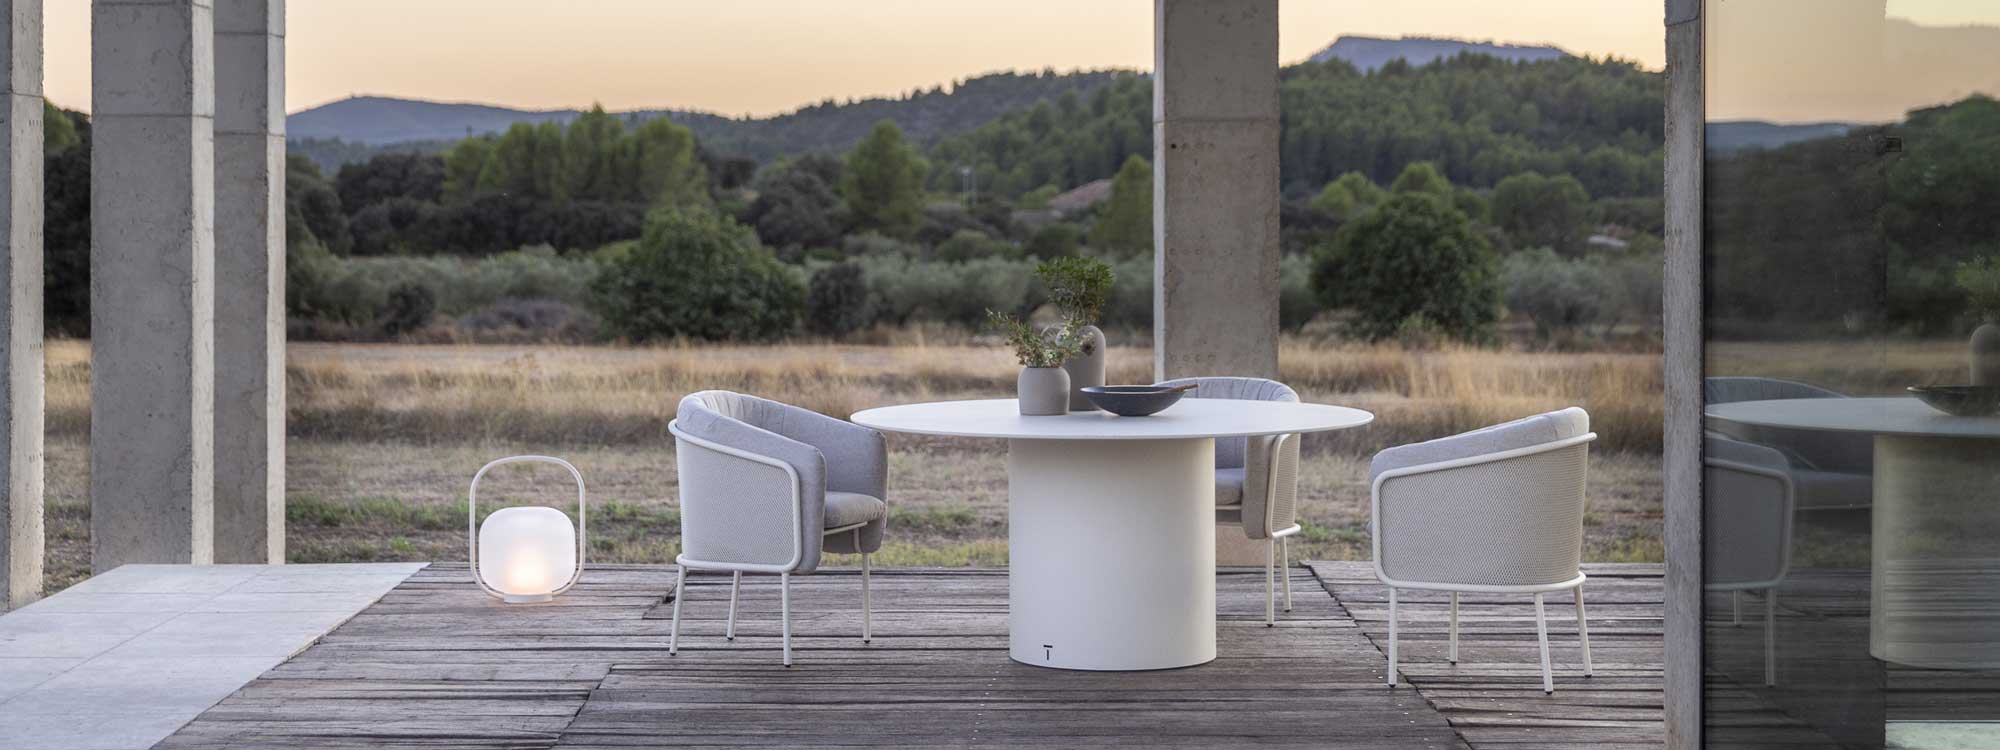 Image of Slide white upholstered garden chairs and Branta white round garden table by Todus on wooden decking at dusk